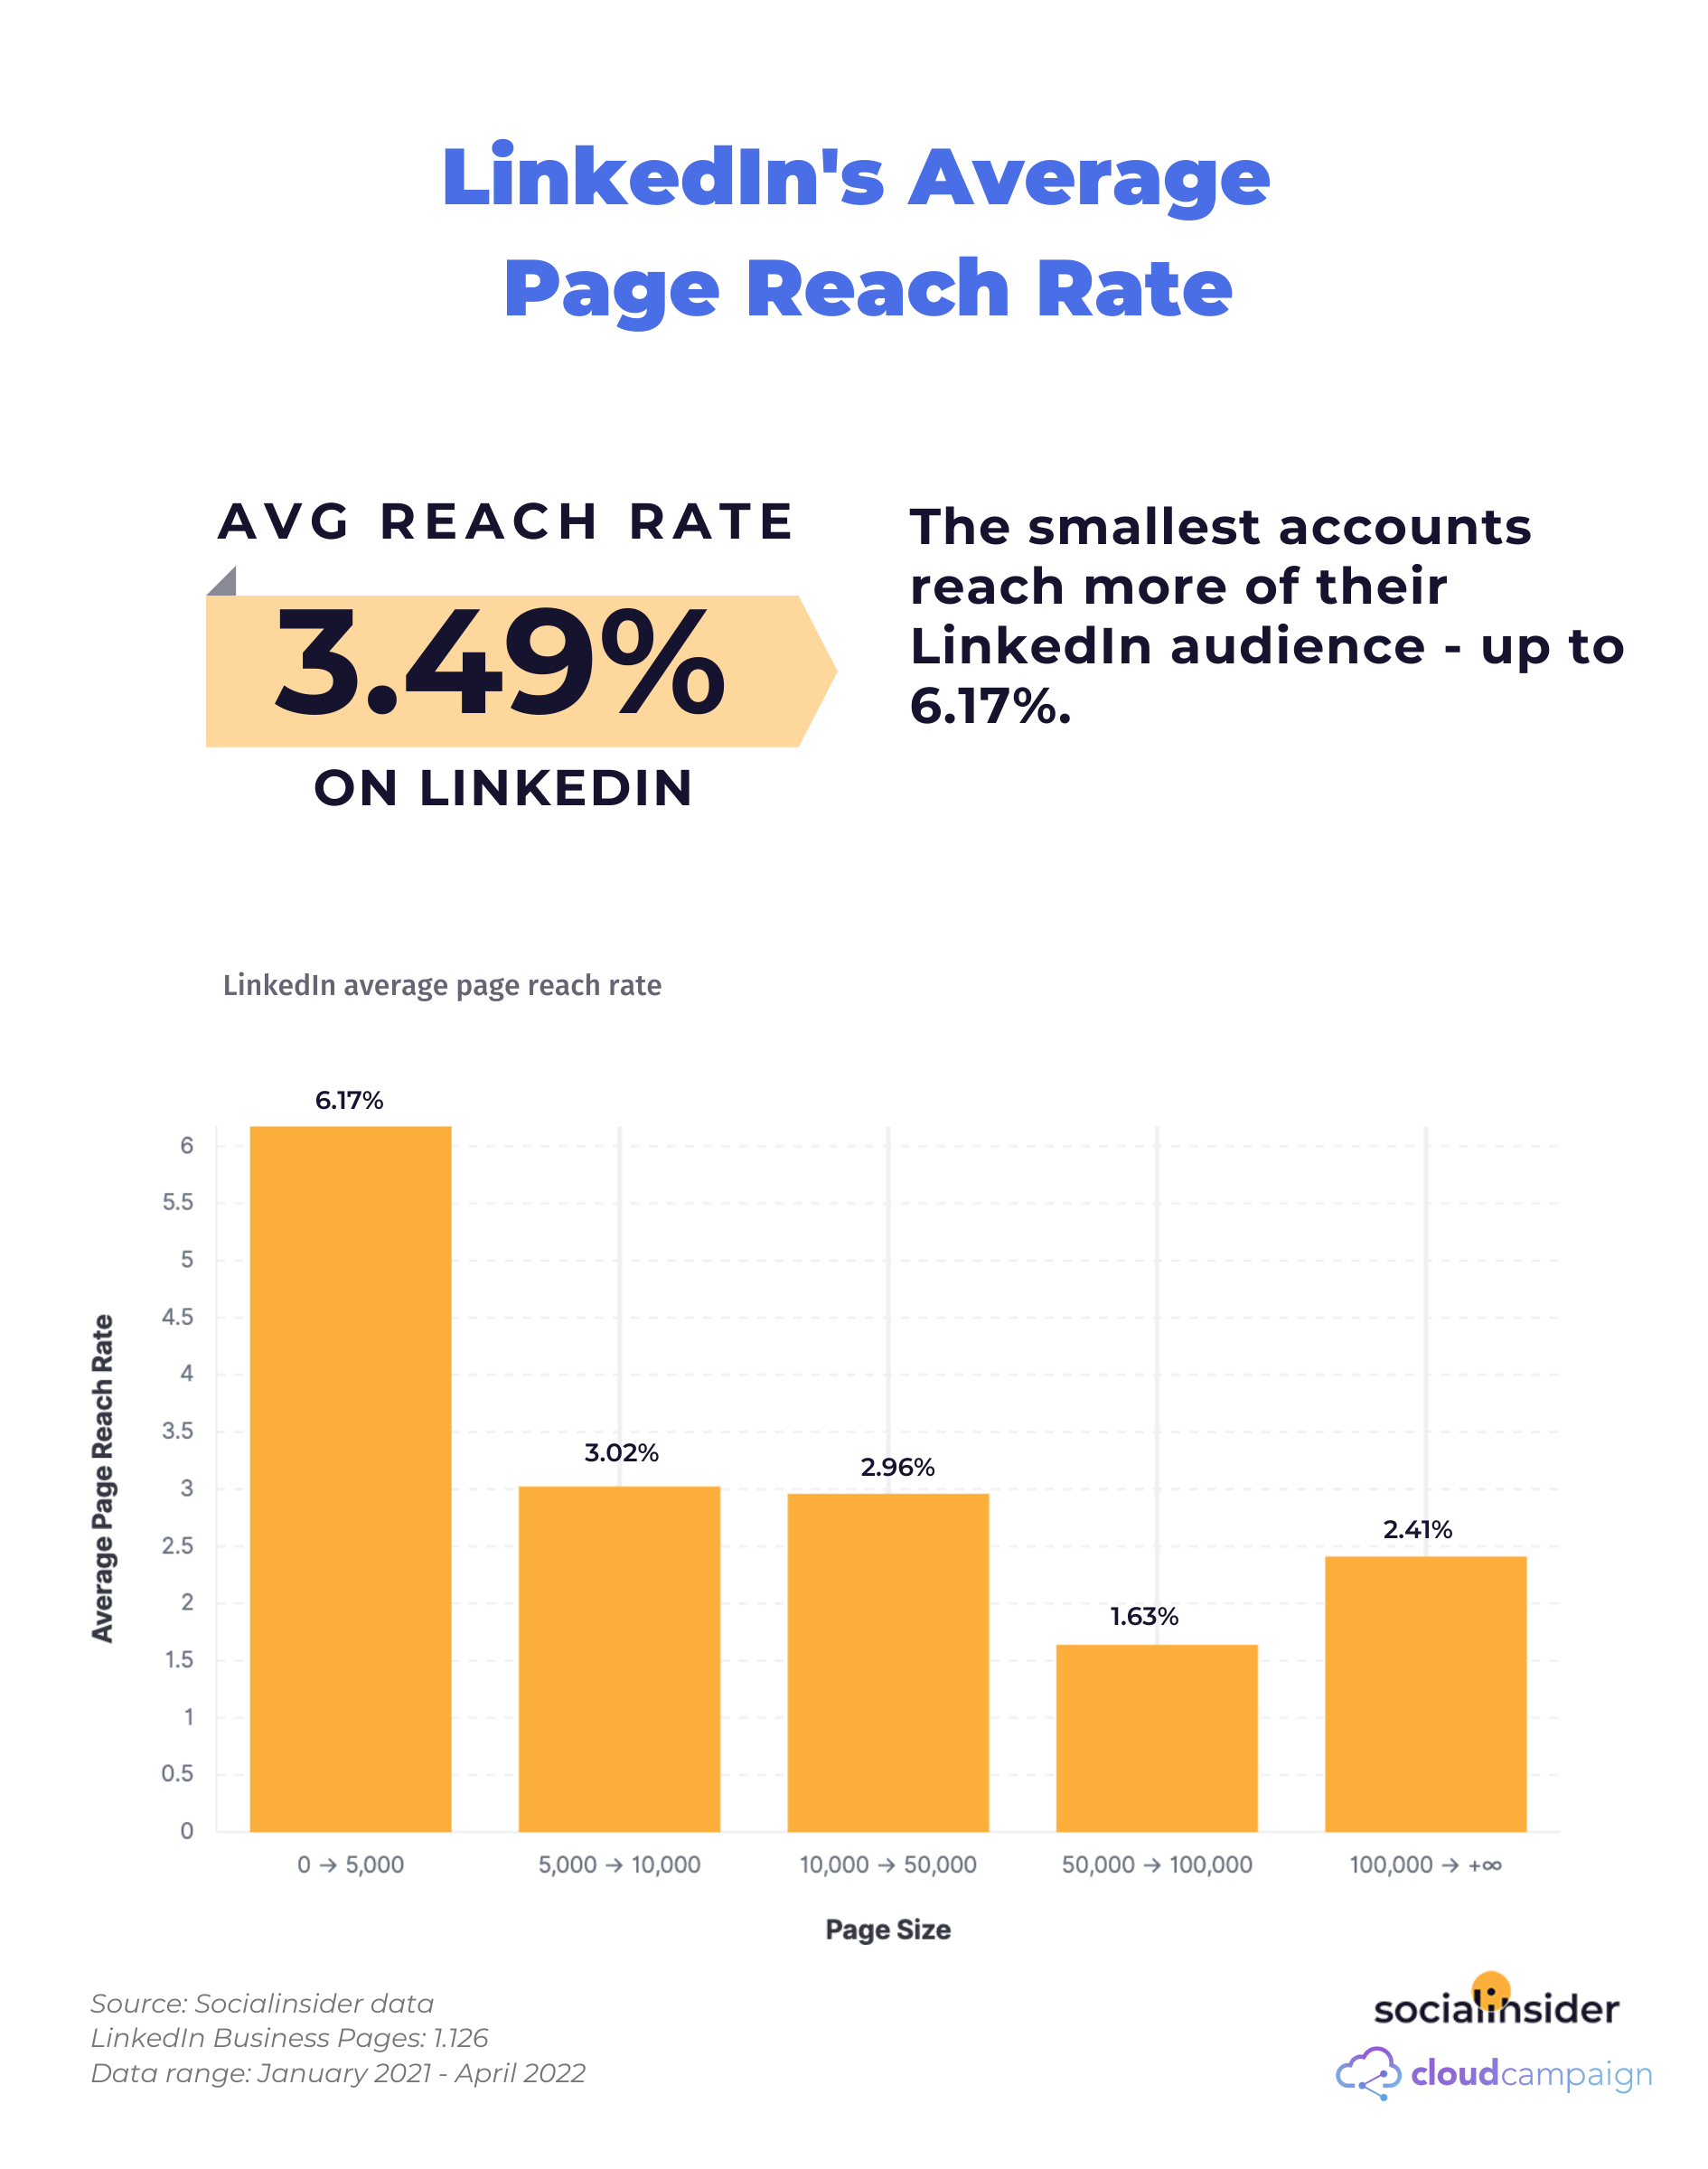 Here is a chart showing what's the average page reach rate on LinkedIn in 2022.